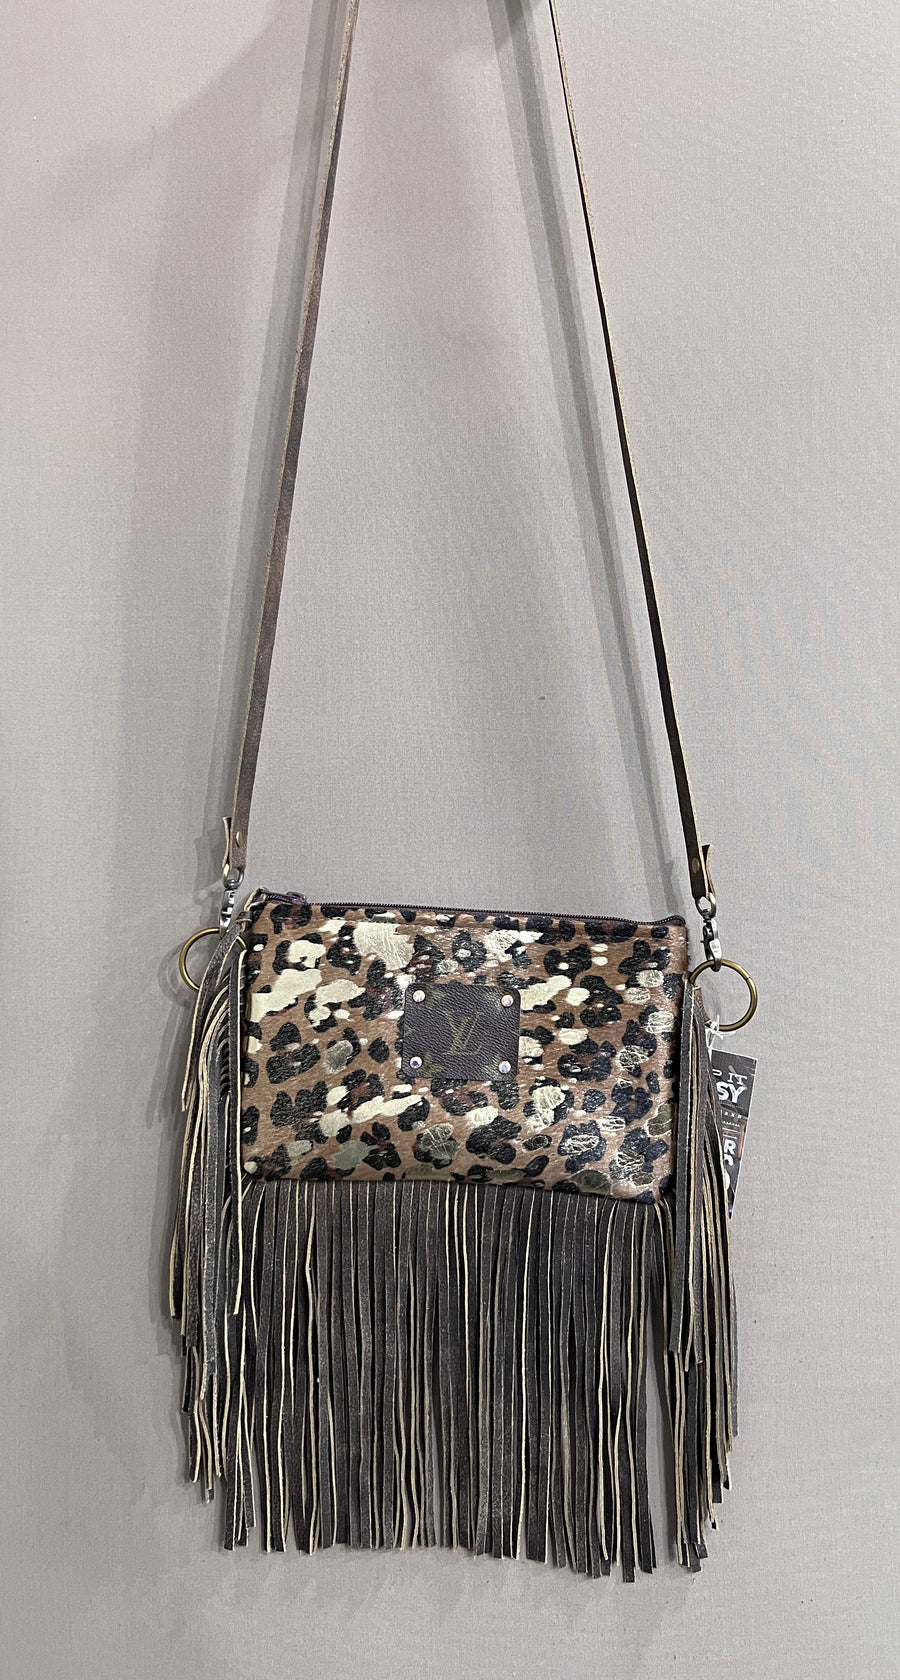 Olive (With Fringe) Crossbody Handbag with LV Upcycled Patch